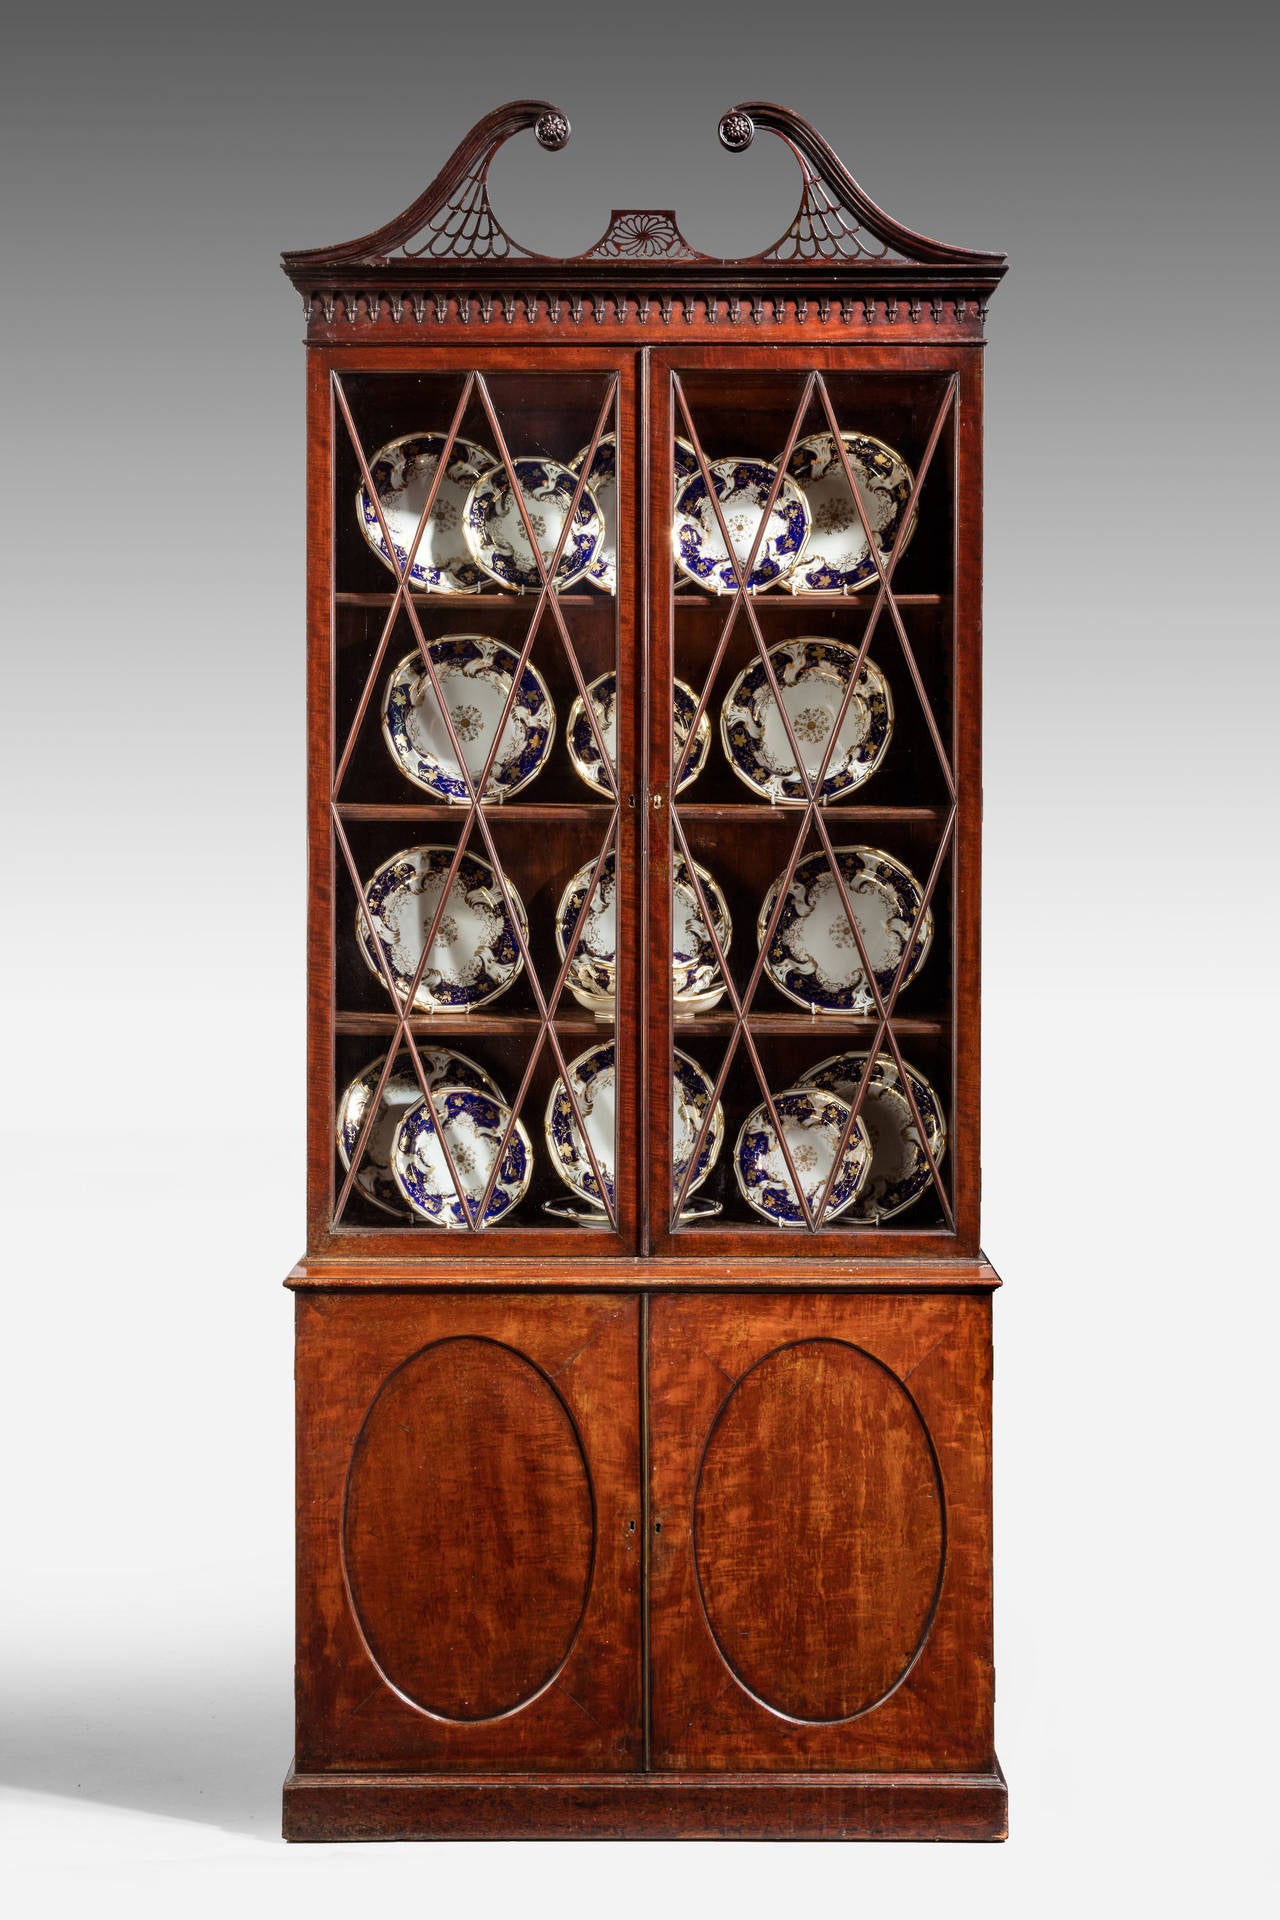 A very fine George III period mahogany bookcase. The drawers to the base with inset contrasting oval timbers. The top with diamond shaped glazing bars. Under a beautifully carved swan neck pierced pediment. Overall of exceptionally good quality.

